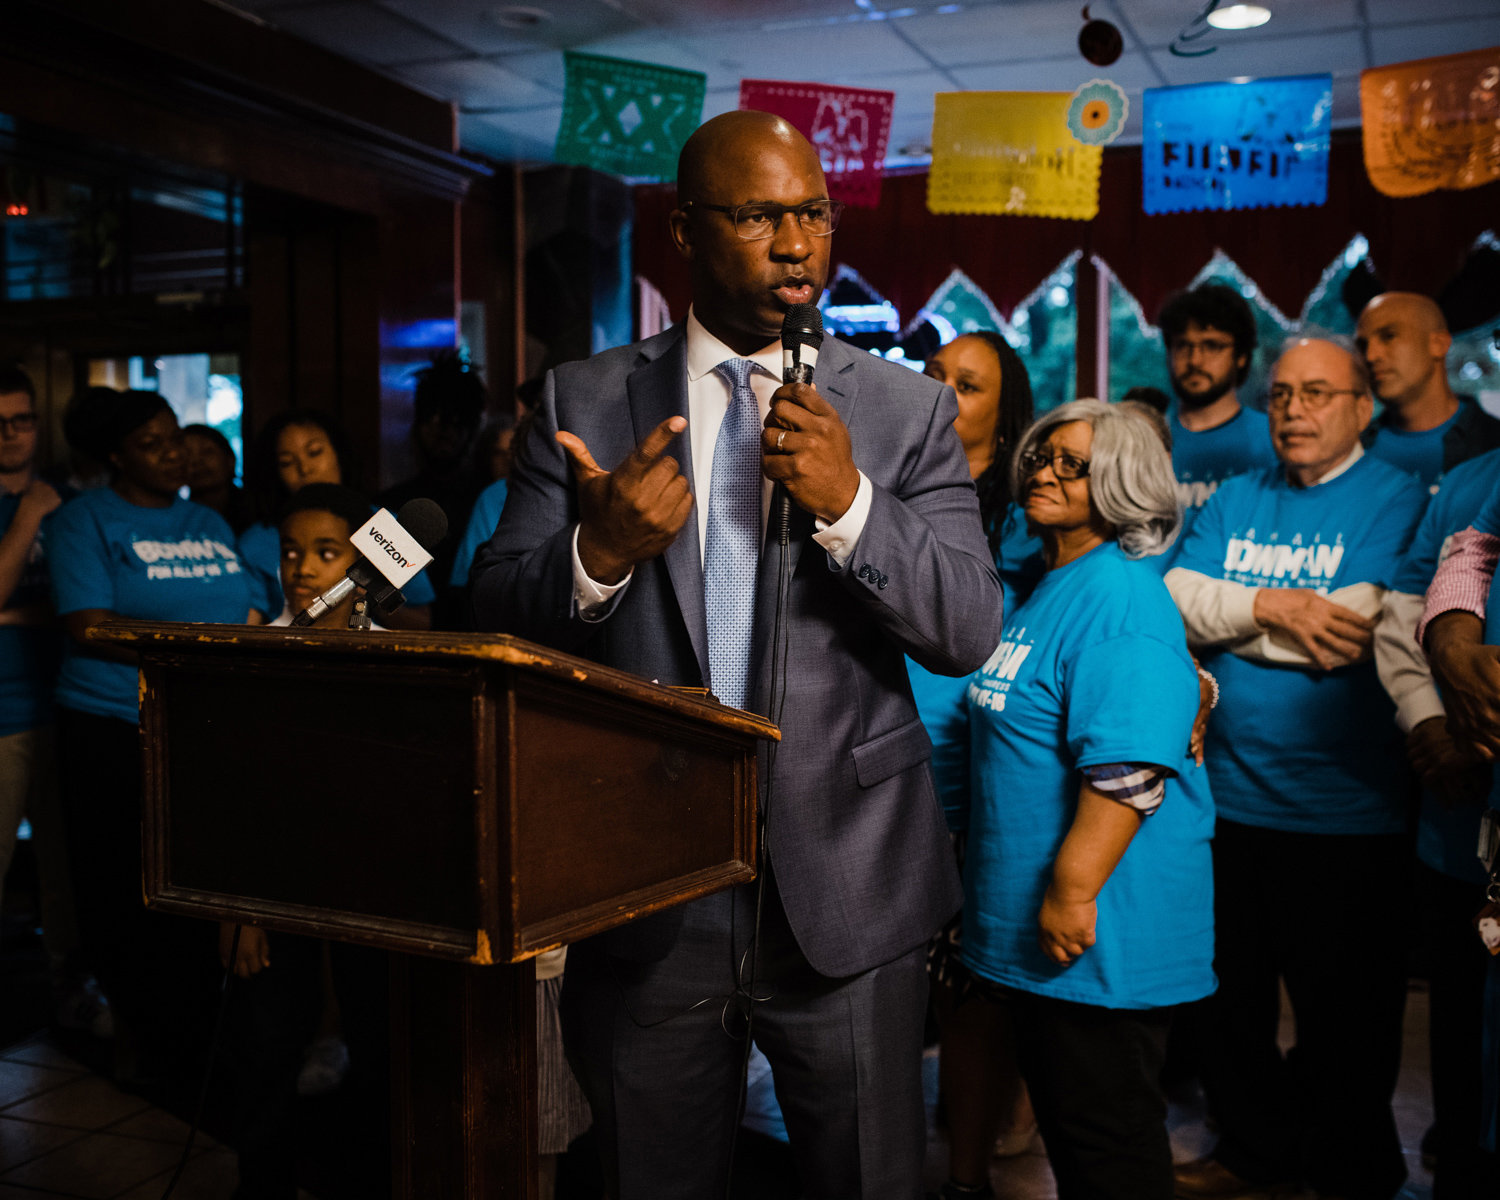 During his campaign, Jamaal Bowman was up against powerful incumbent Eliot Engel. But Bowman says the power comes from his constituents, and he’s ready to ‘fight like hell’ to improve their lives from Washington.